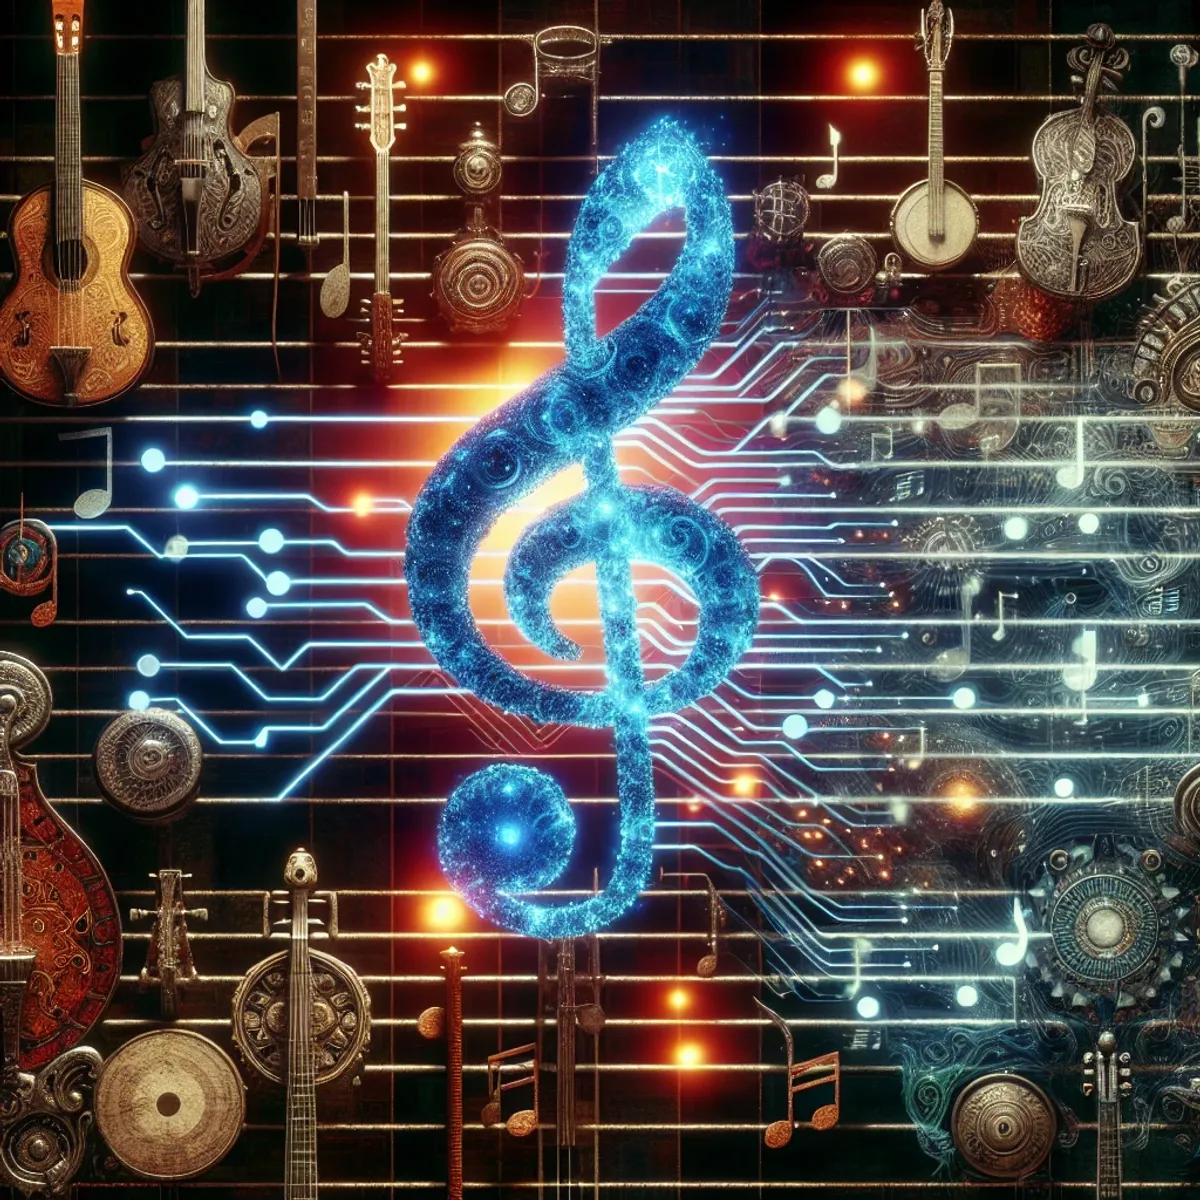 Futuristic neural network superimposed on a traditional music note surrounded by various musical instruments.